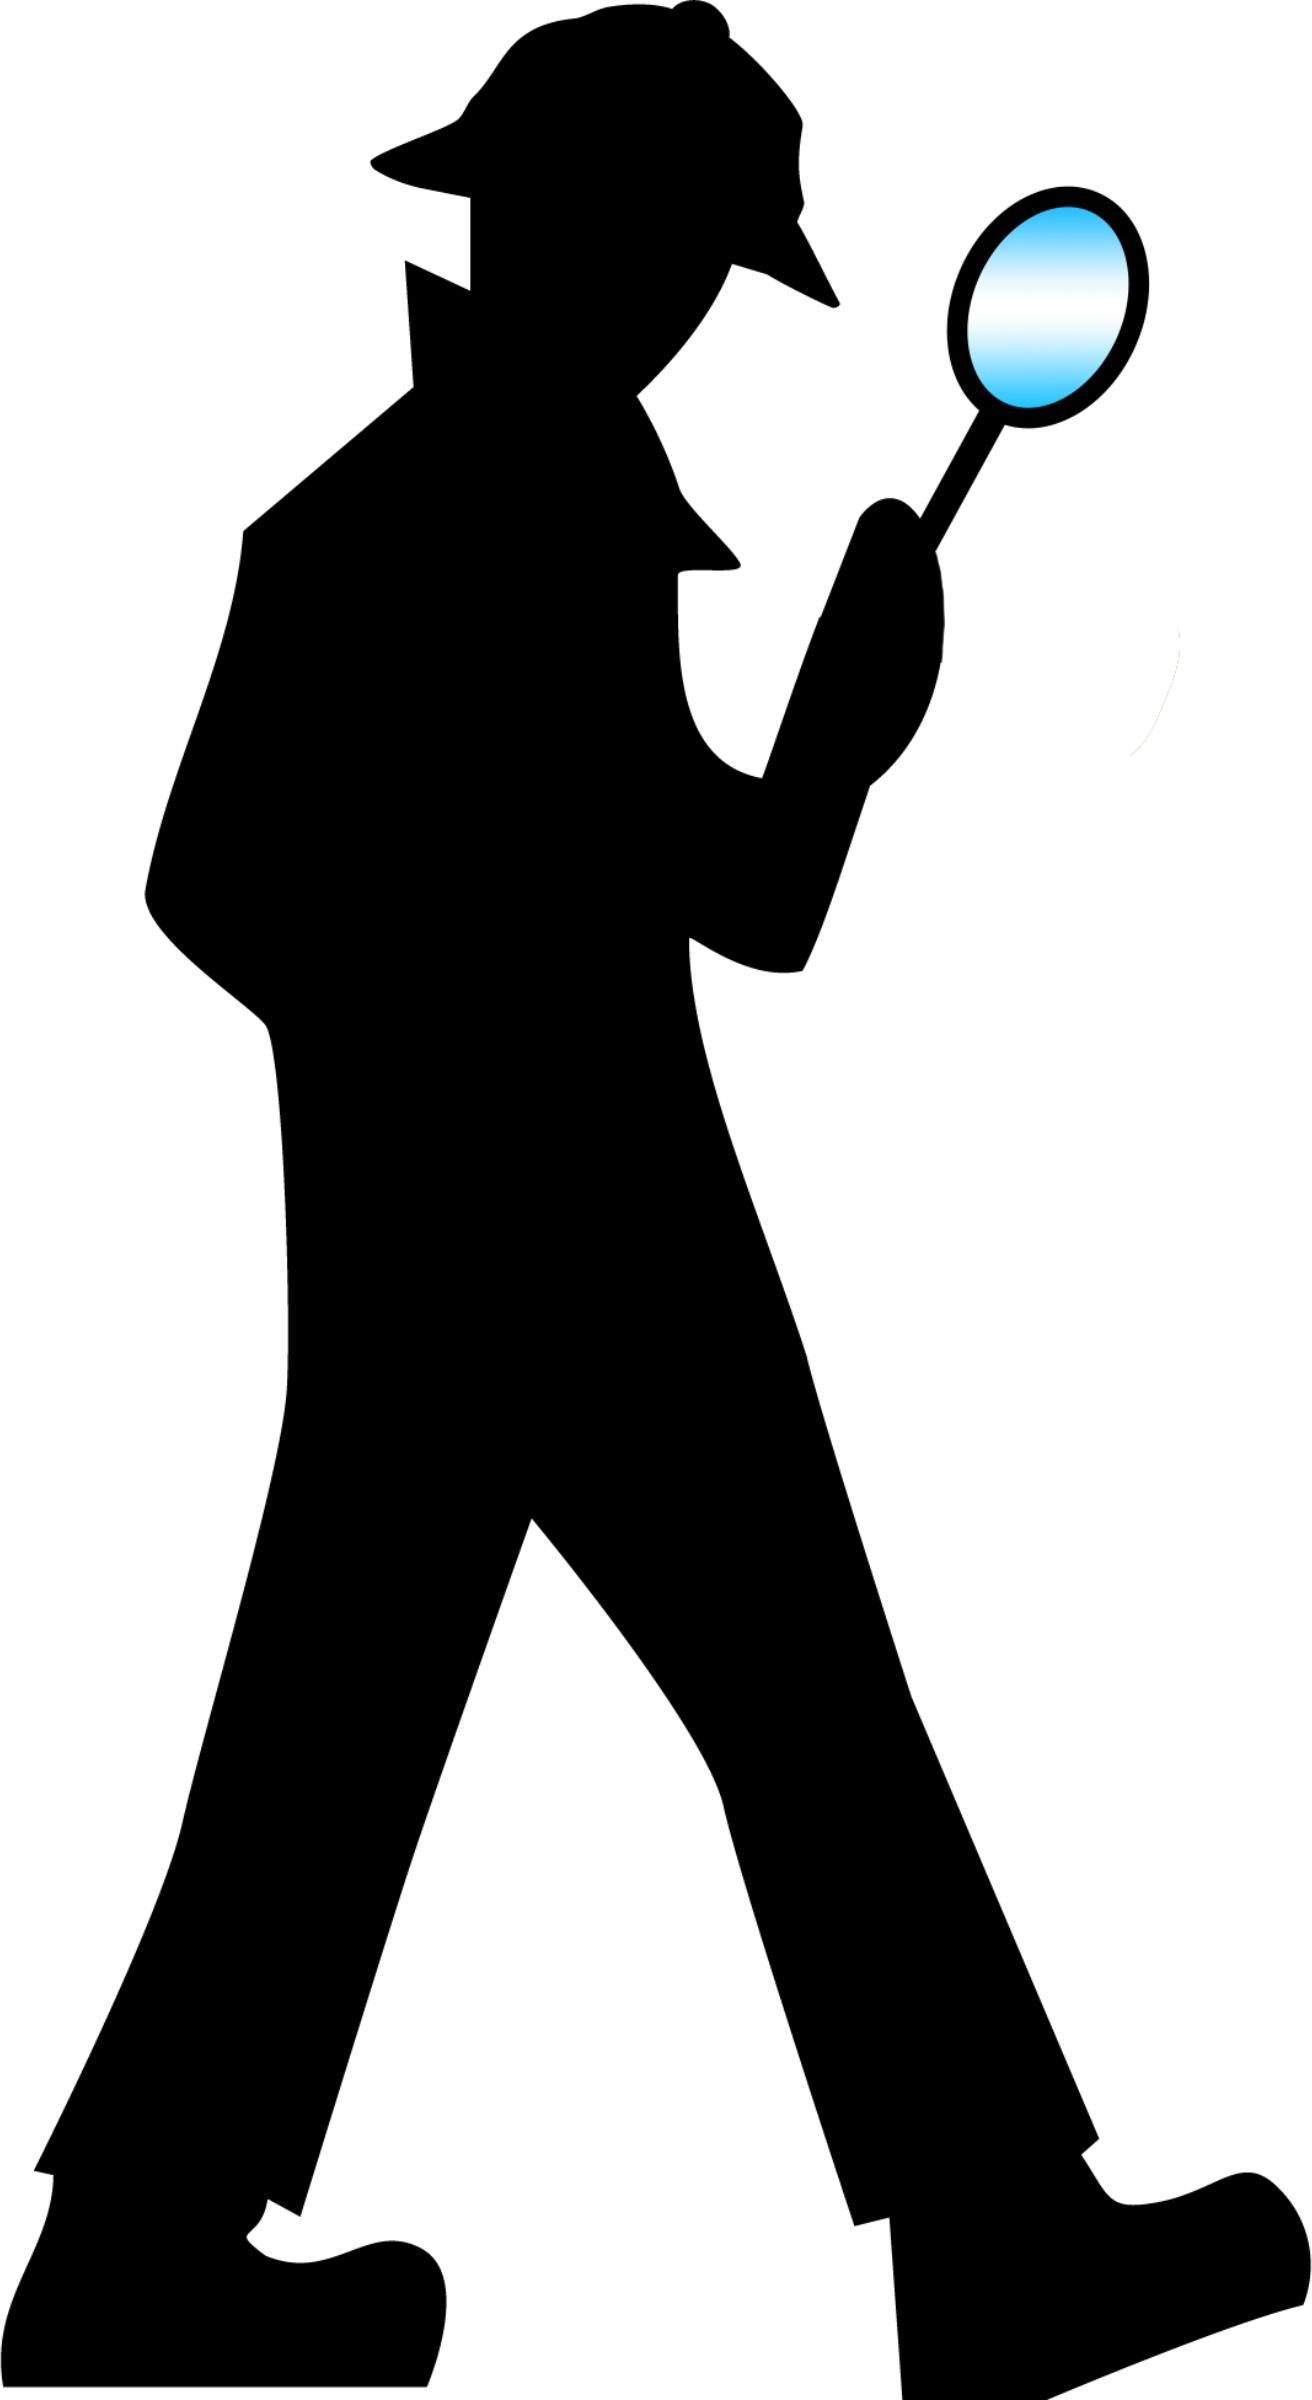 Detective With Magnifying Glass - Magnifying Glass Detective, Transparent background PNG HD thumbnail